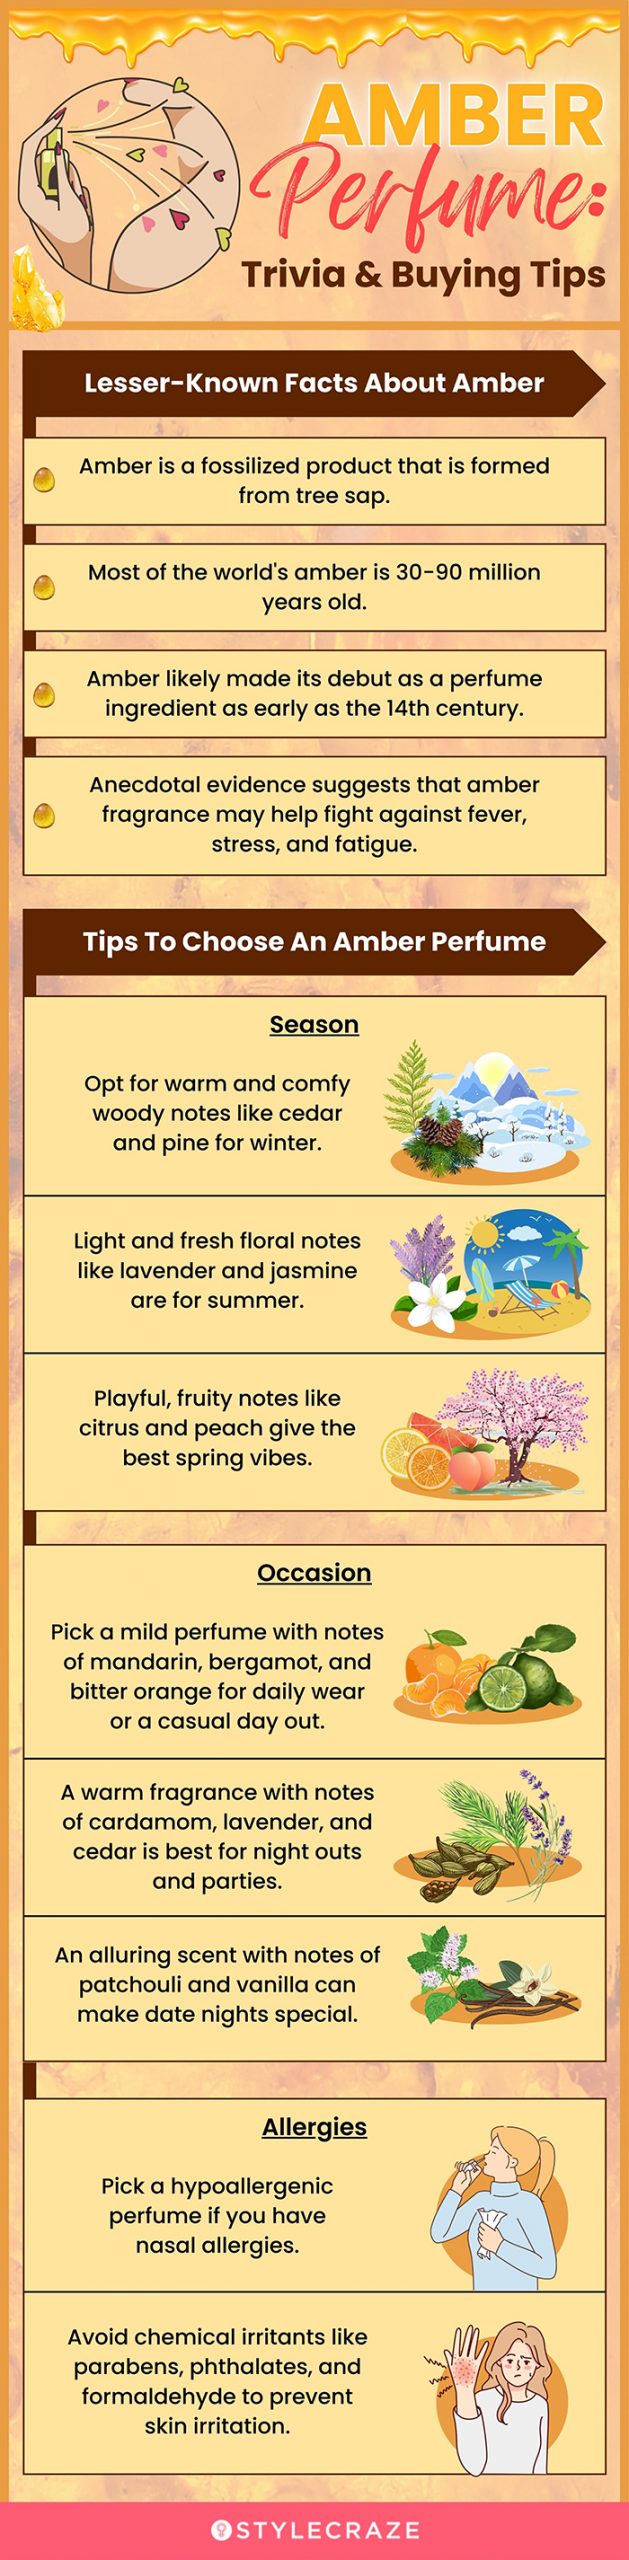 Amber Perfume: Trivia & Buying Tips (infographic)